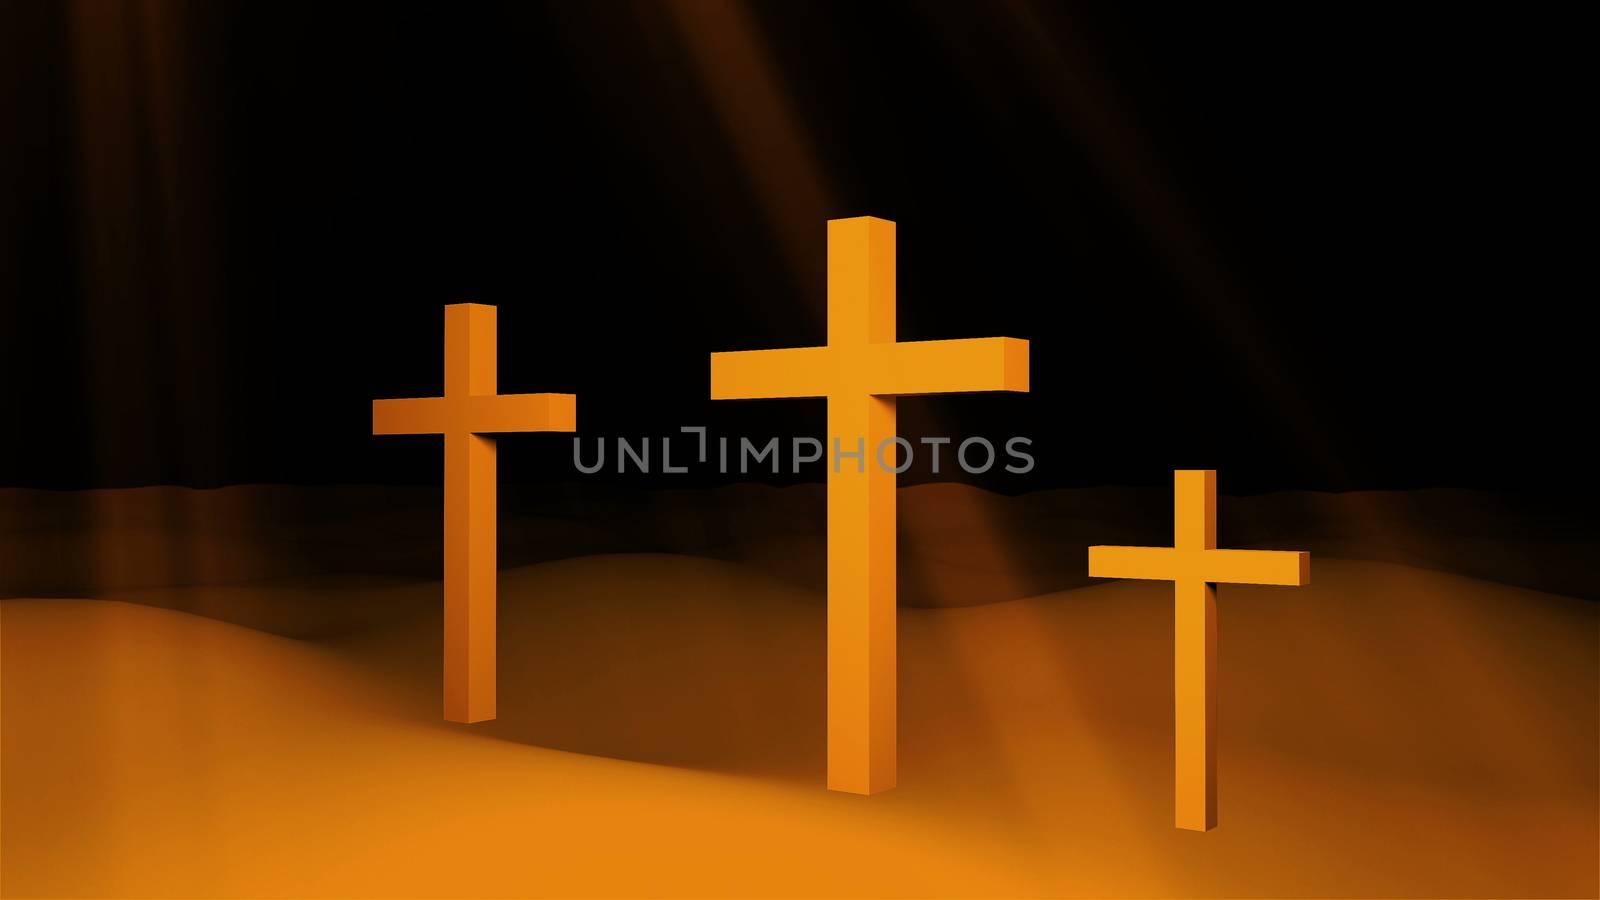 Three christian crosses are on ground and sun rays, resurrection Easter conceptual art, 3d rendering backdrop